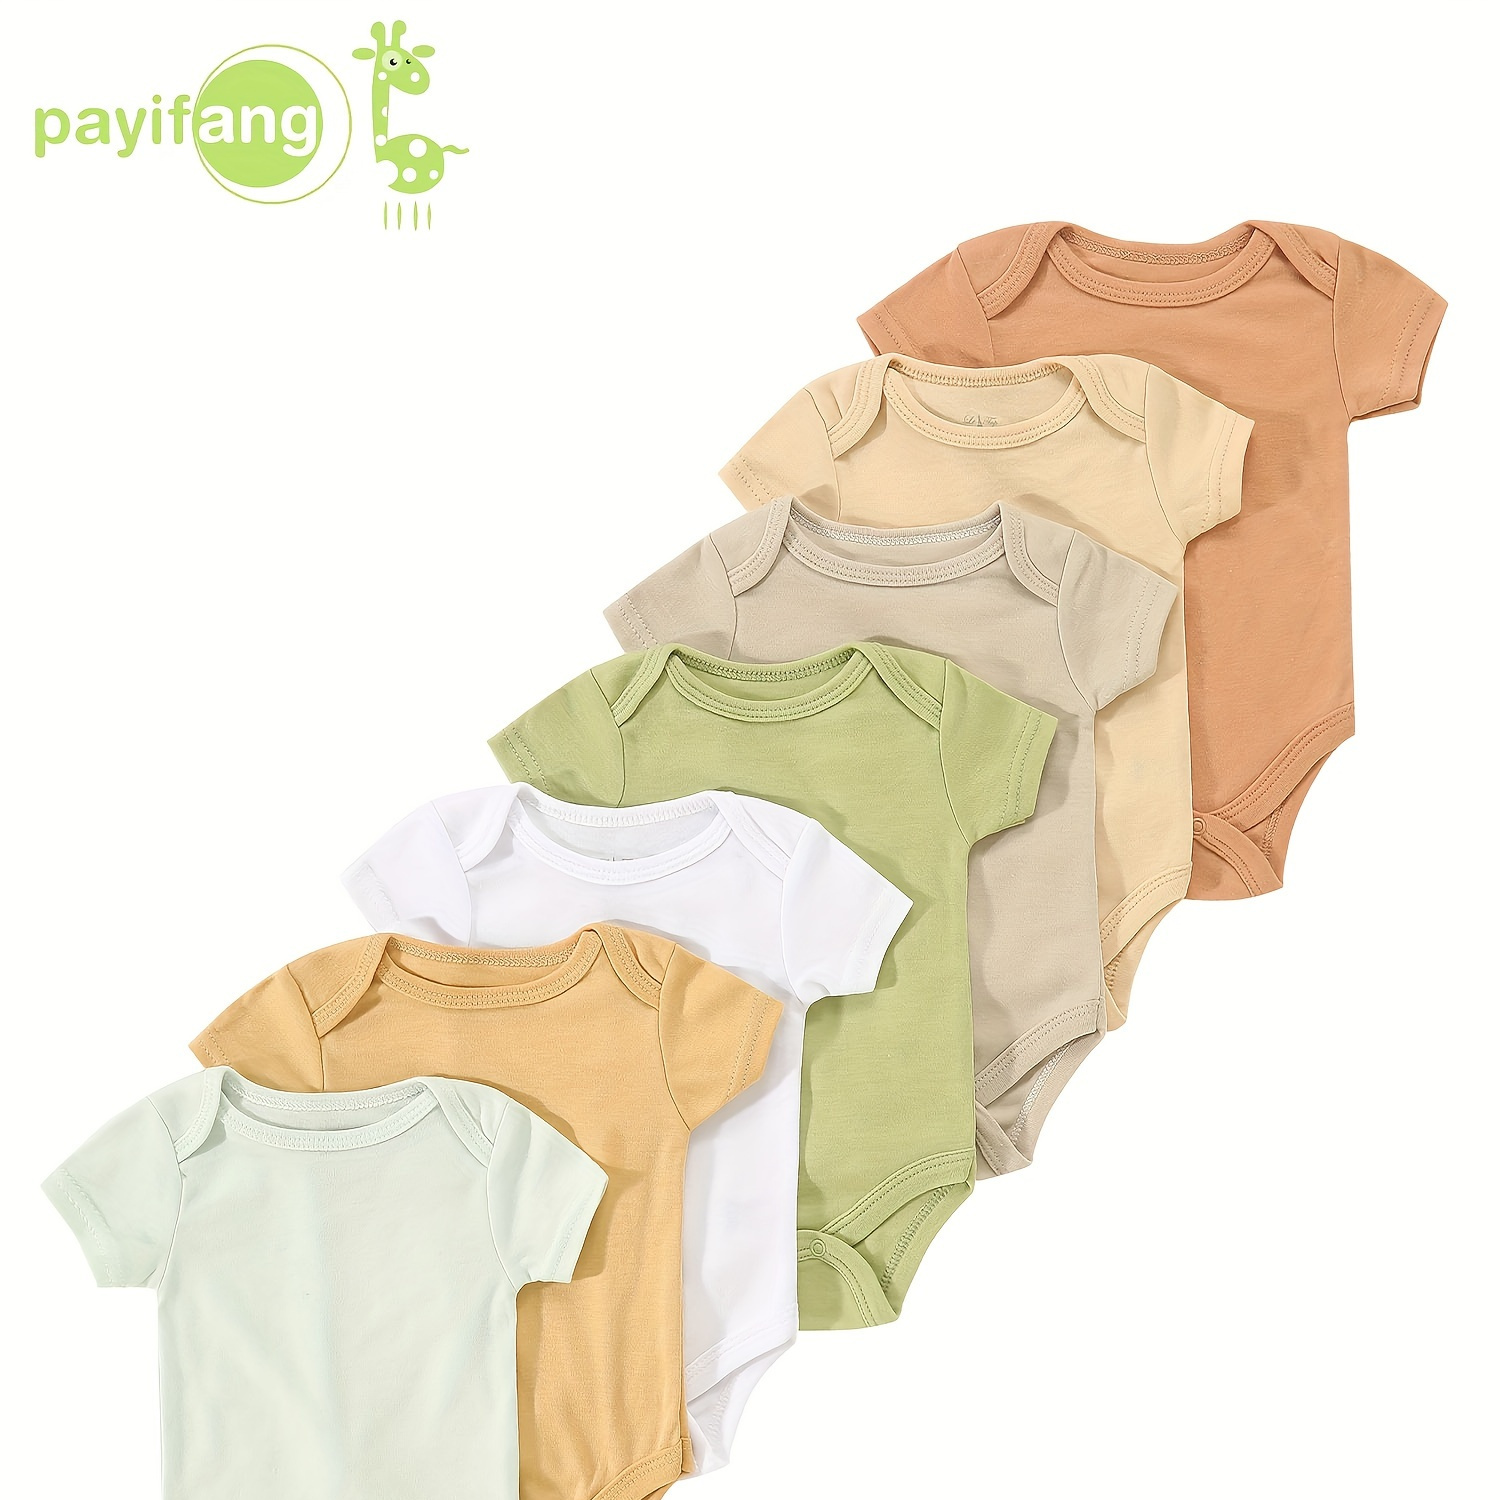 

7-pack Newborn Baby Bodysuits, Assorted Colors, Casual Style, Soft Cotton, Comfortable Snap Closure, Unisex Triangular One-piece Outfits